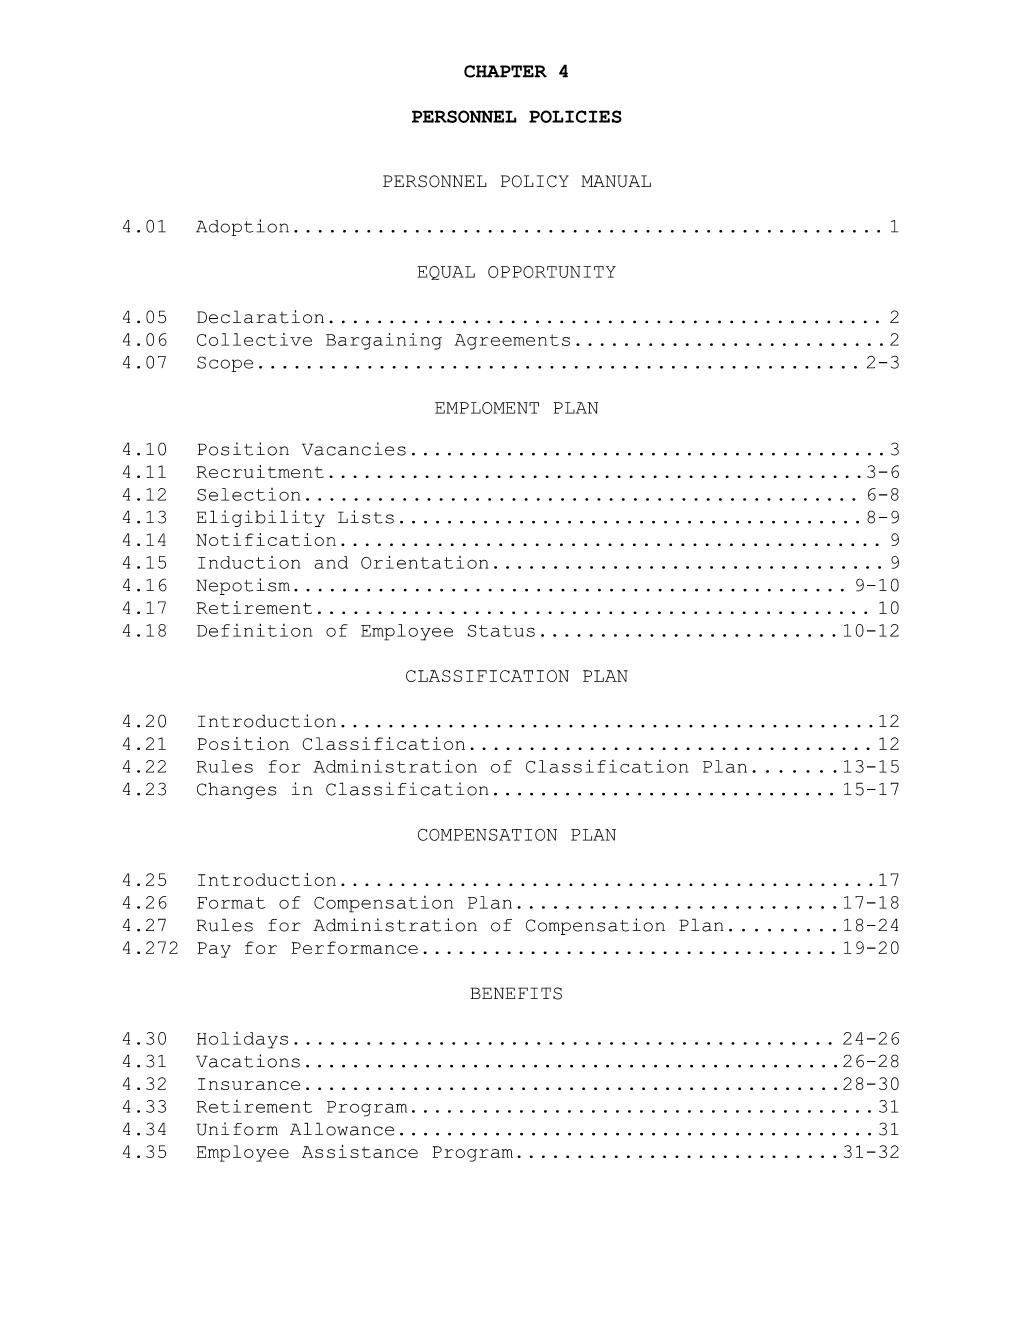 Personnel Policy Manual